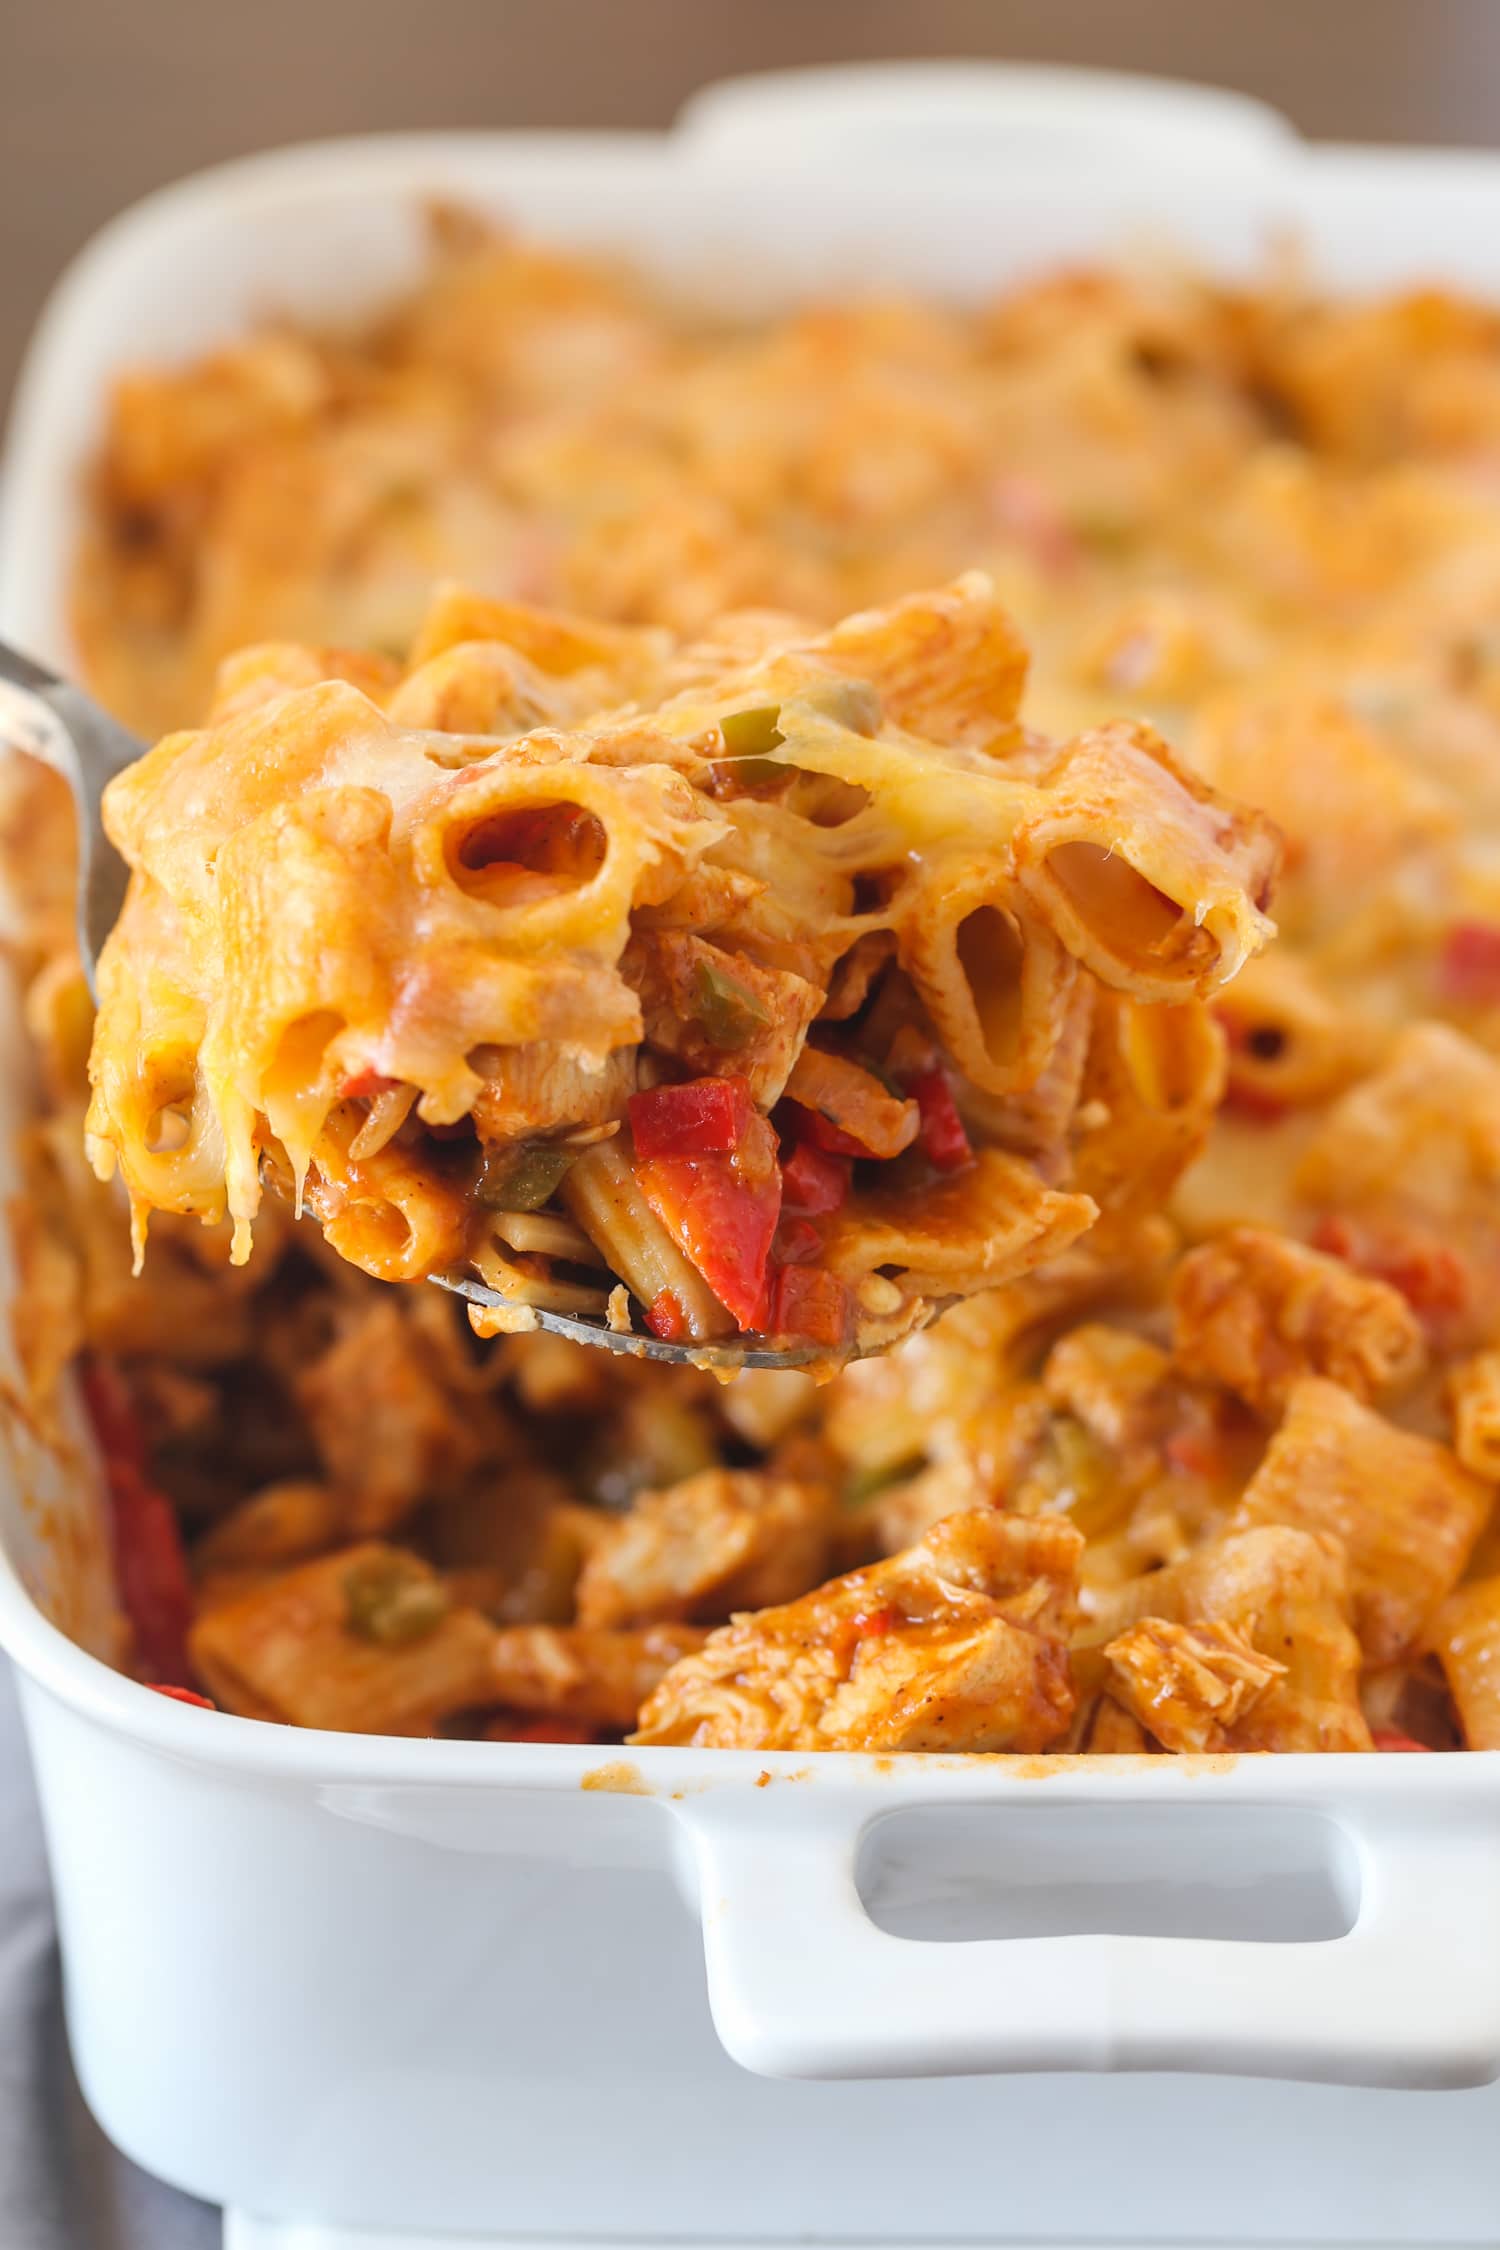 Baked Enchilada Pasta being served with a large spoon from the casserole dish